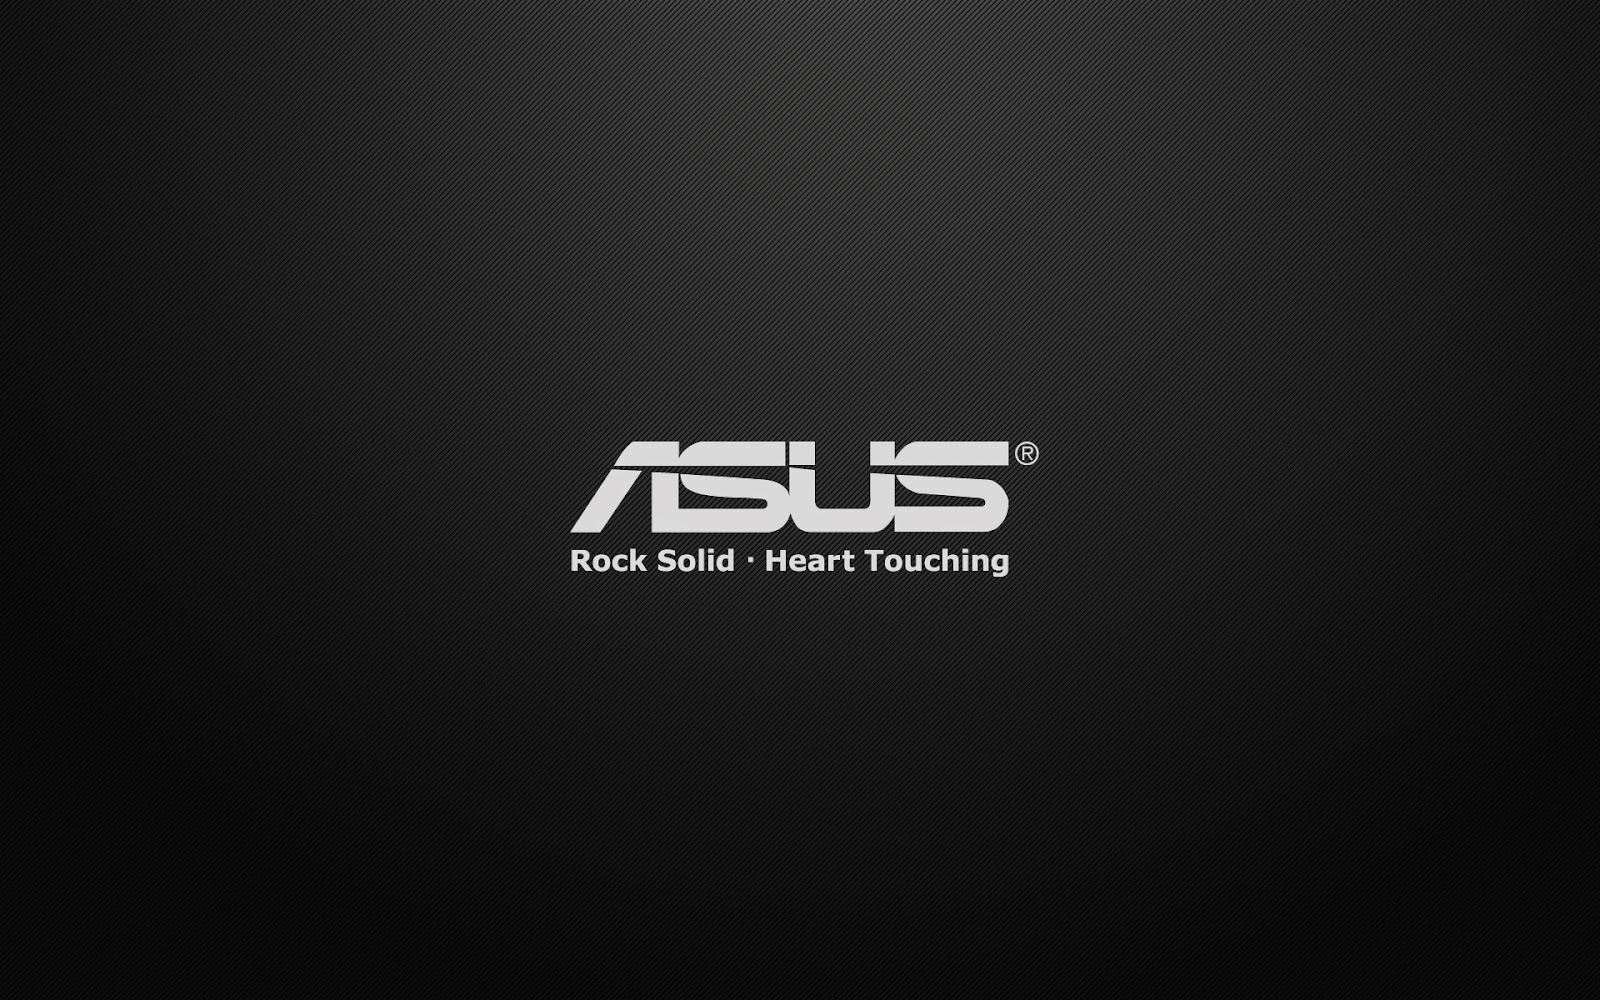 HD WALLPAPERS ASUS WALLPAPERS 1600x1000